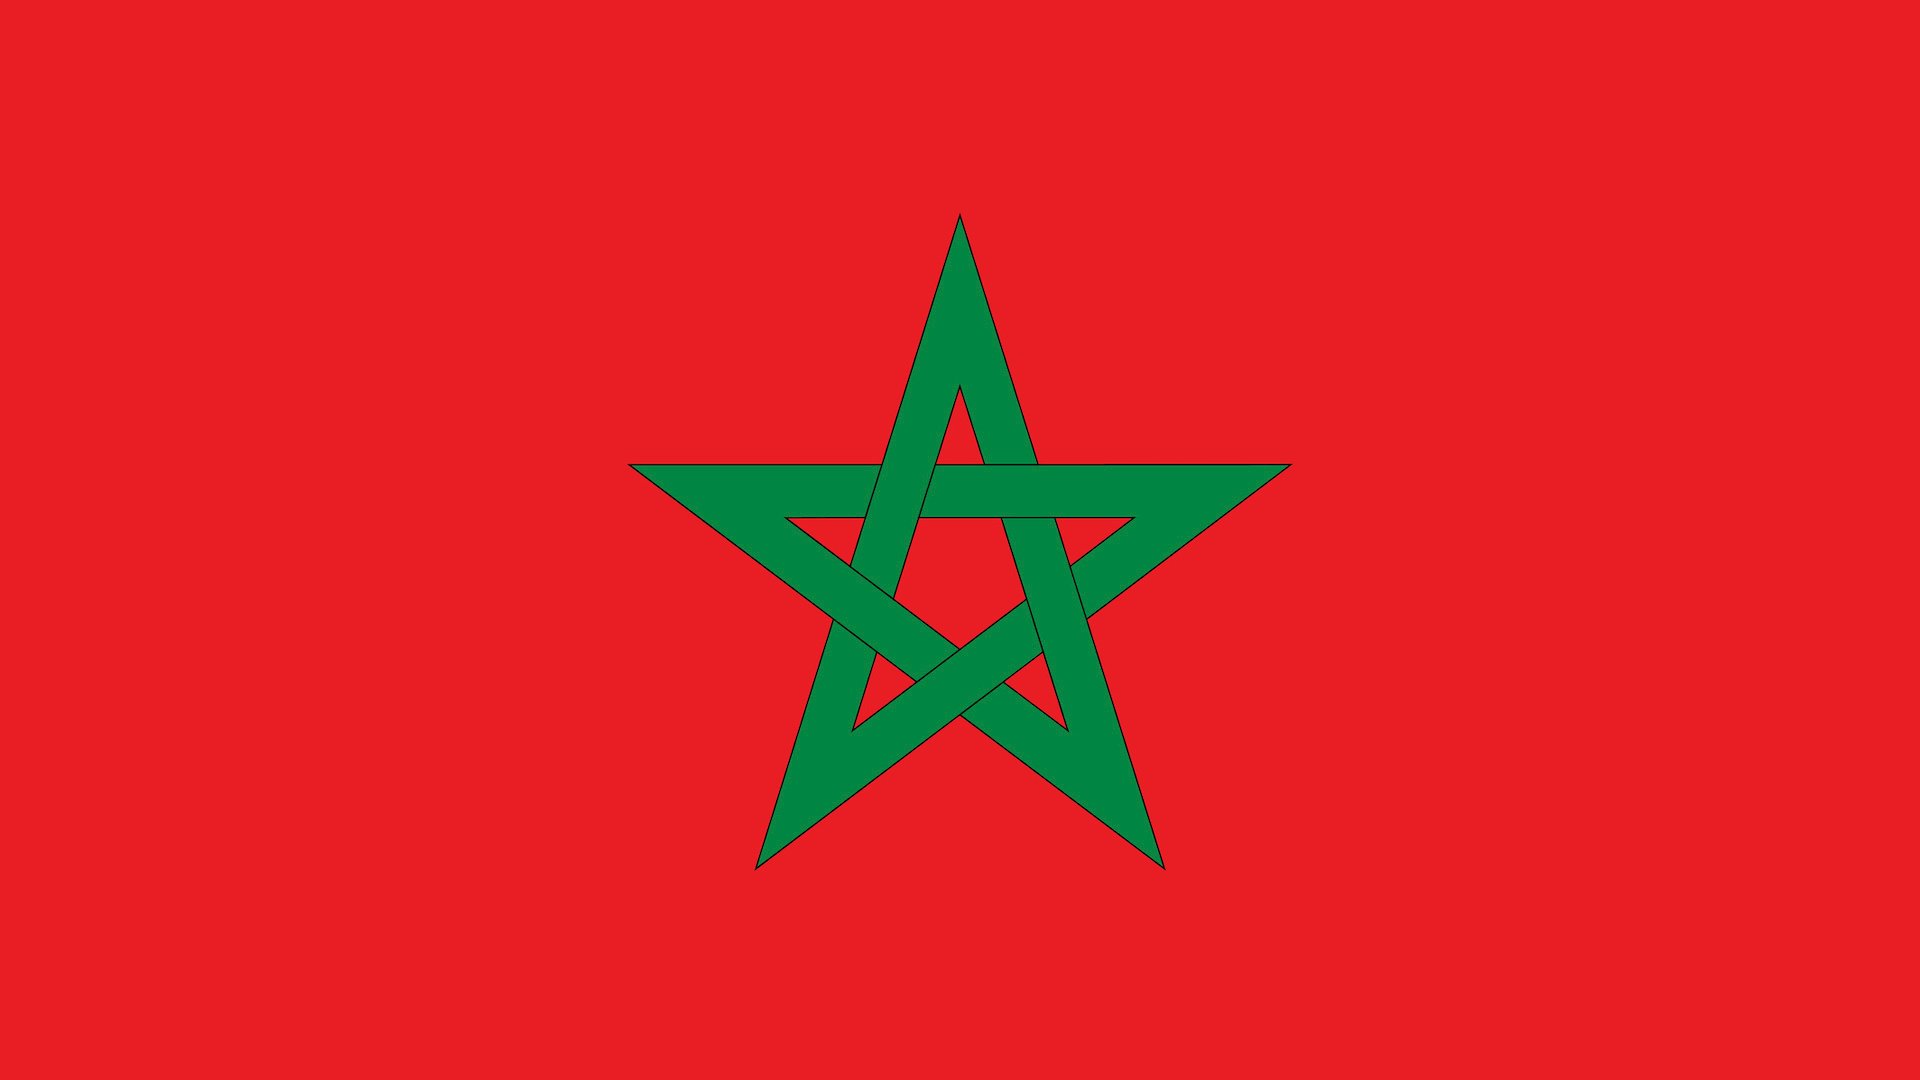 A red flag with a green pentagram